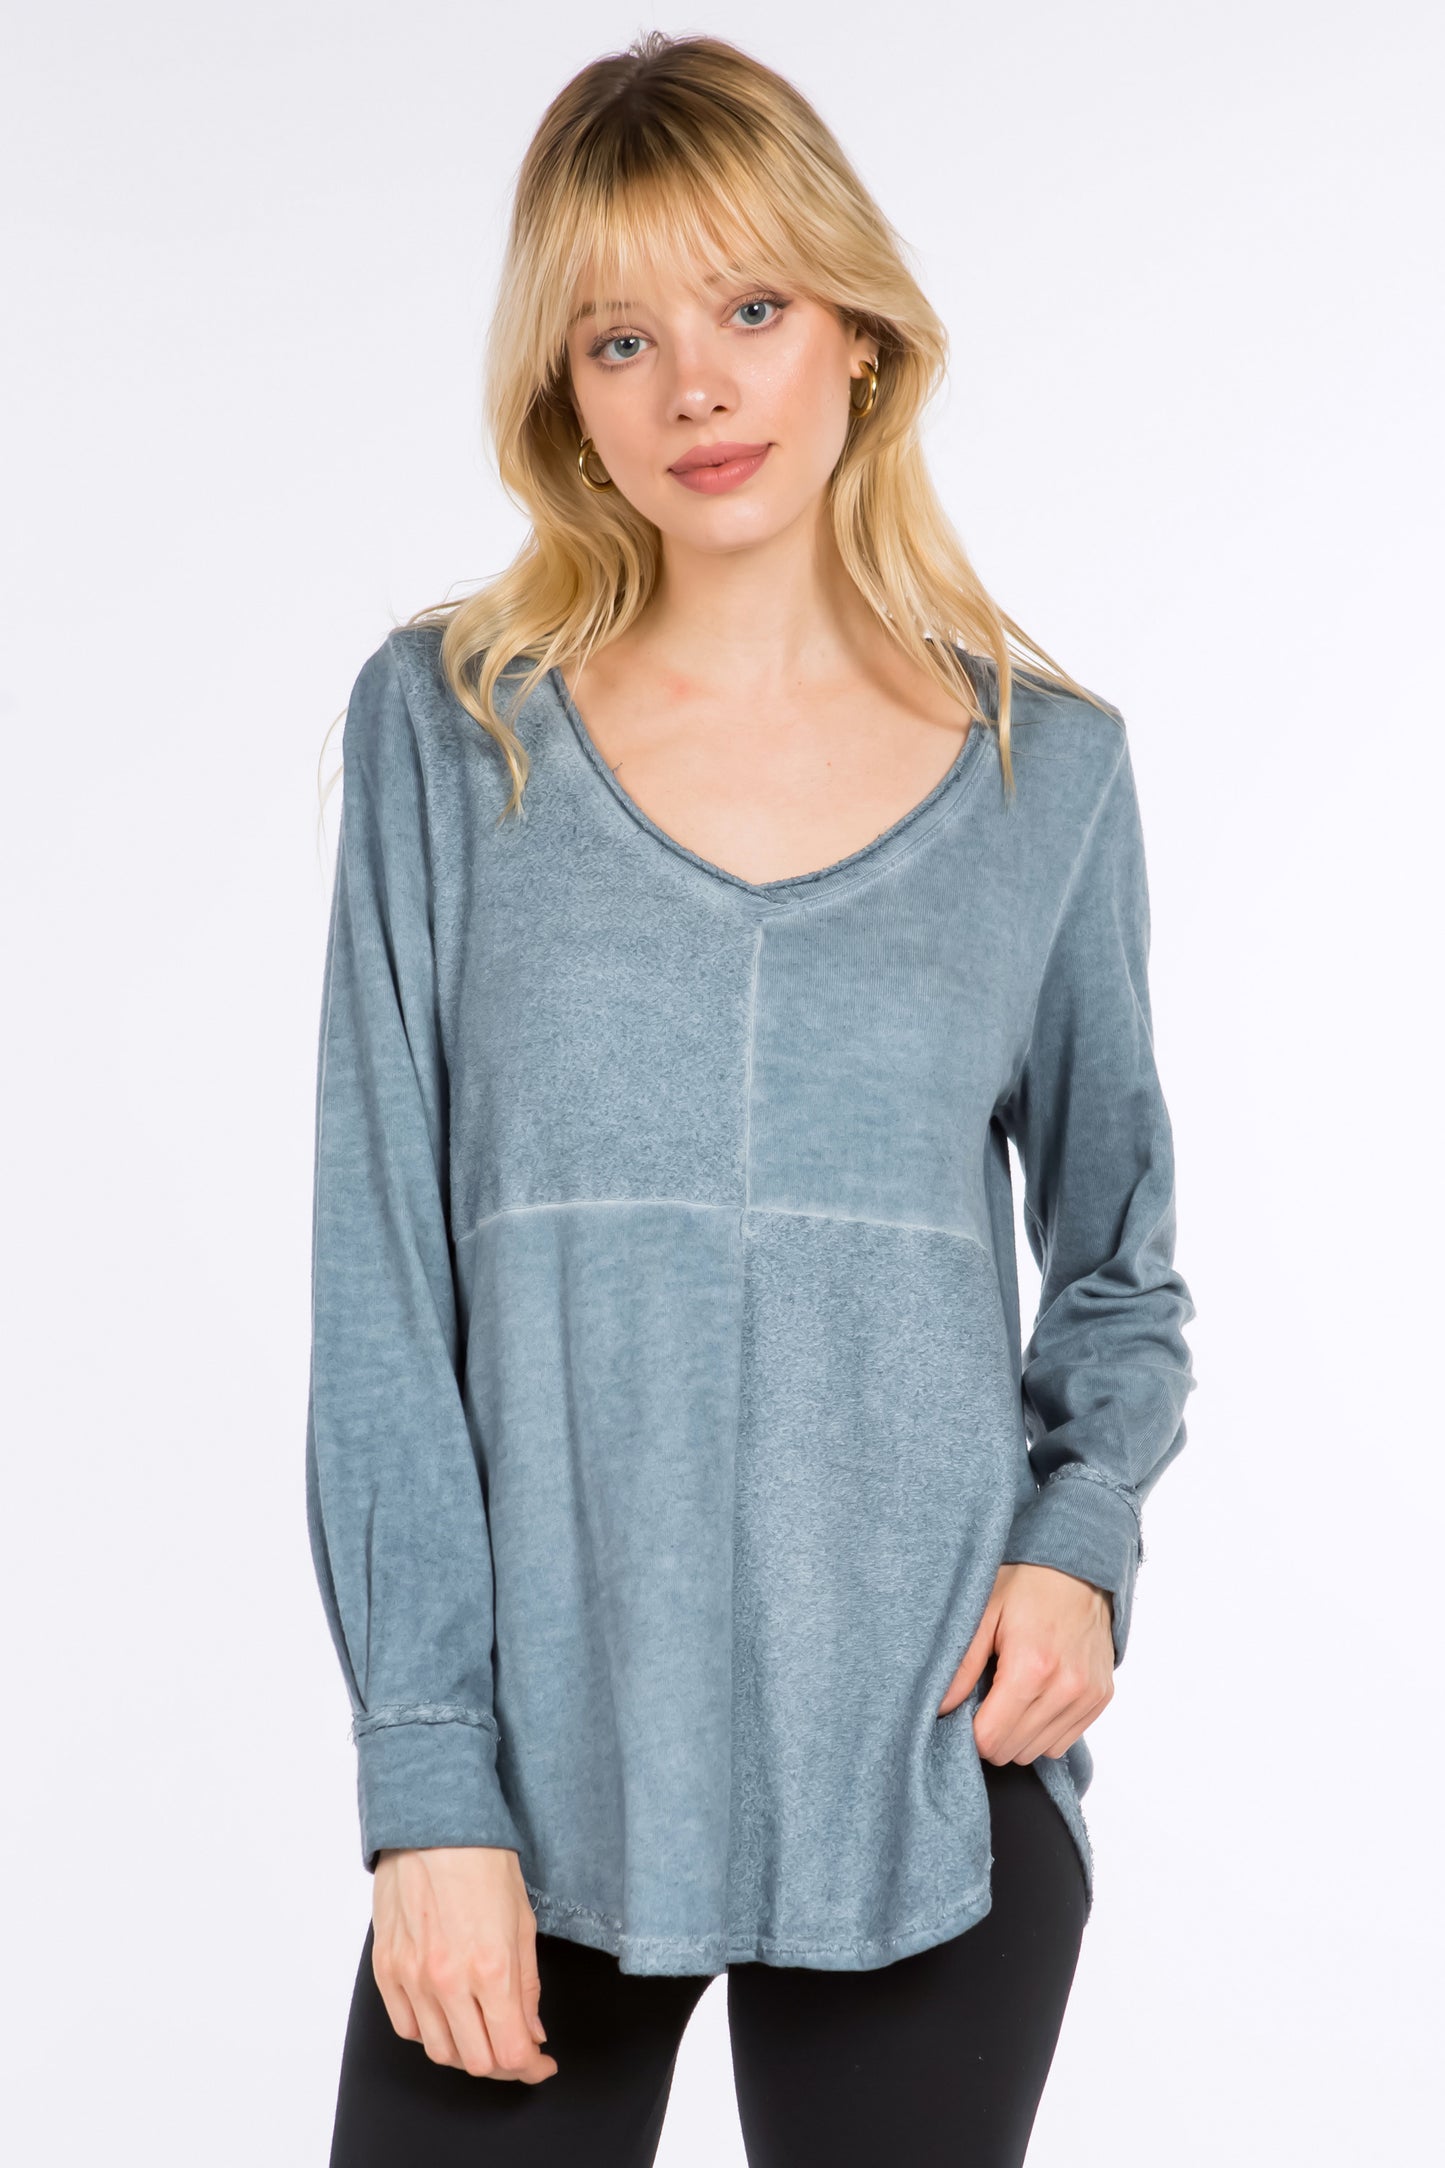 French Terry V-Neck Tunic with Contrast Panel